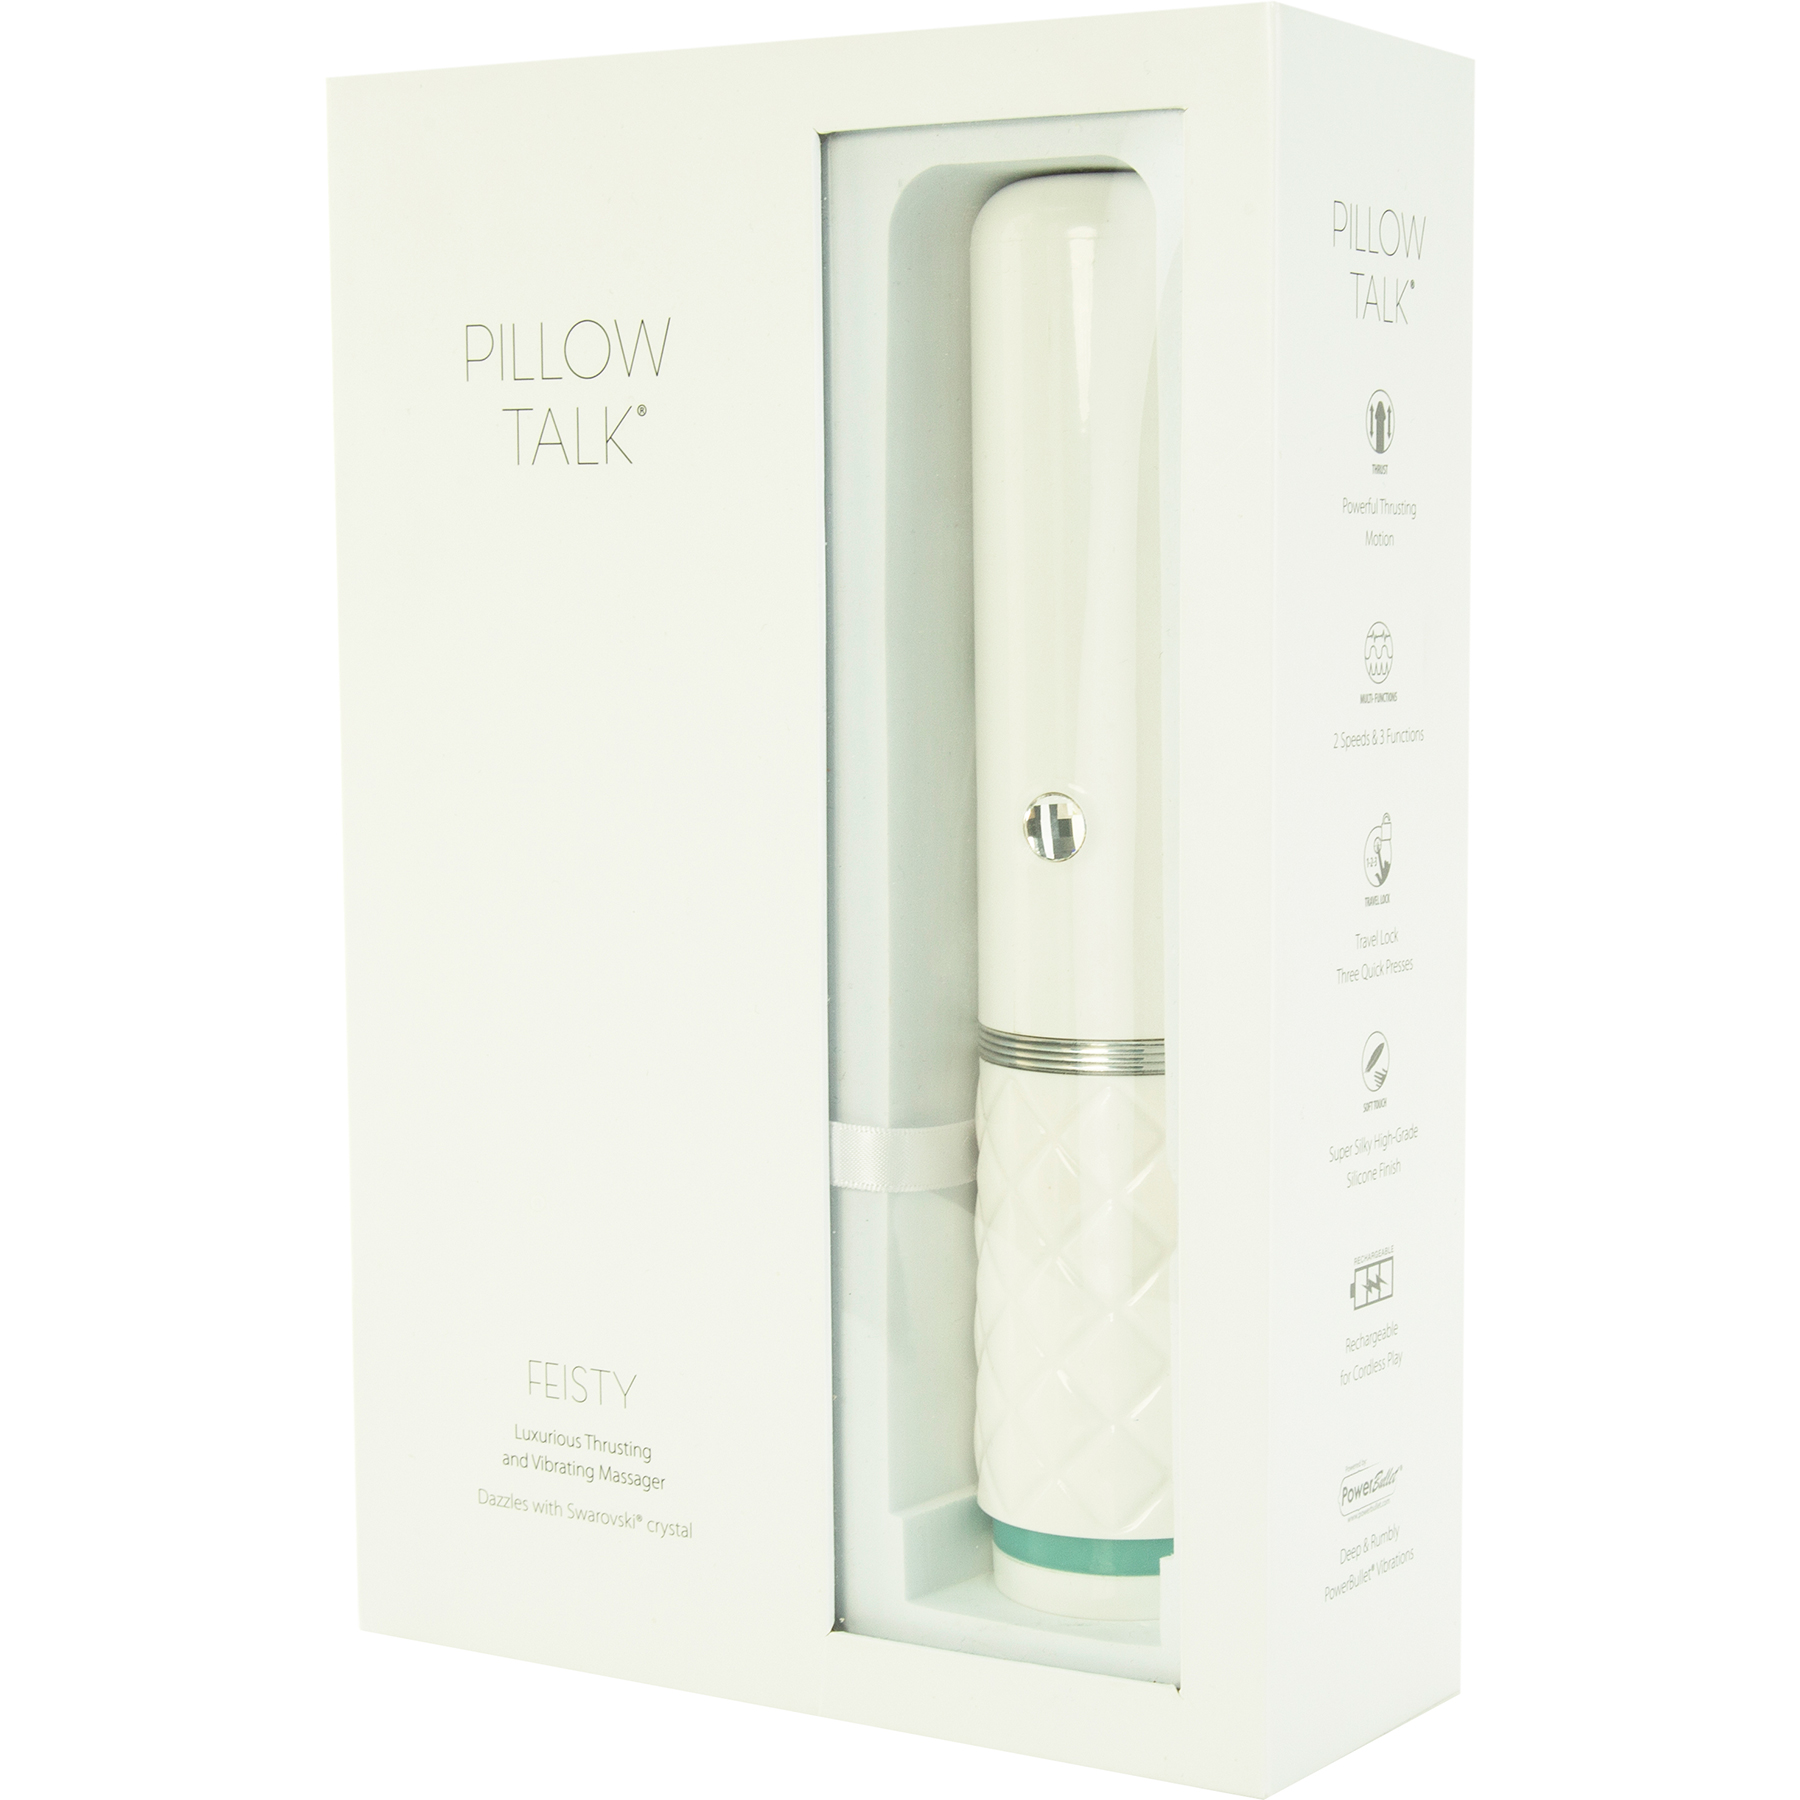 Pillow Talk Feisty Silicone Waterproof Rechargeable Thrusting Vibrator - Package